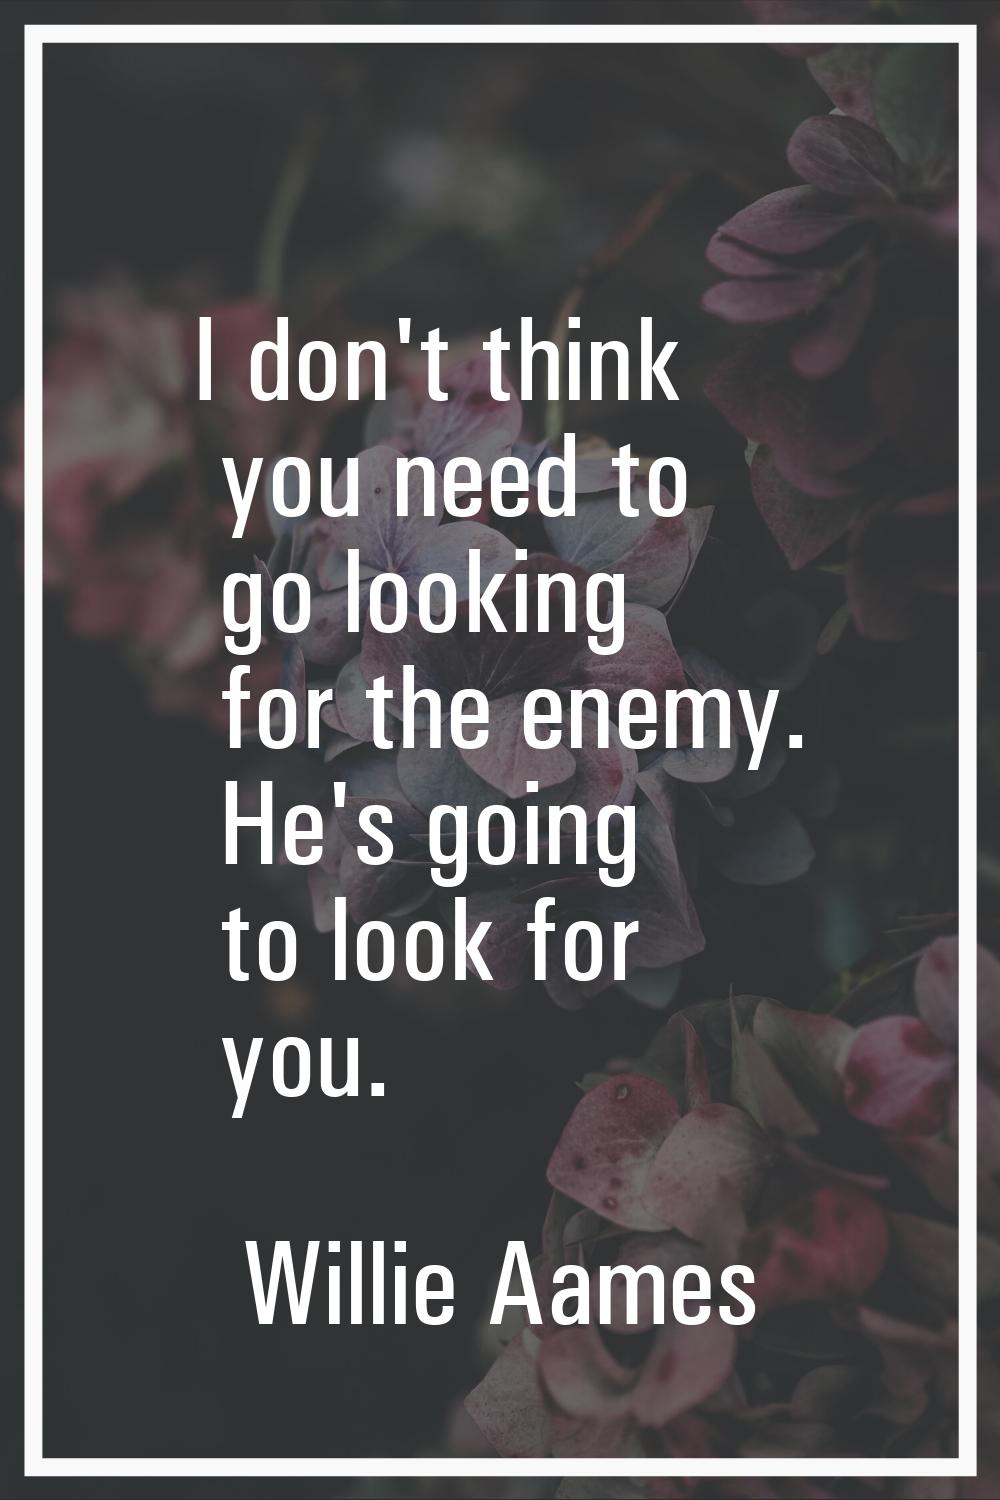 I don't think you need to go looking for the enemy. He's going to look for you.